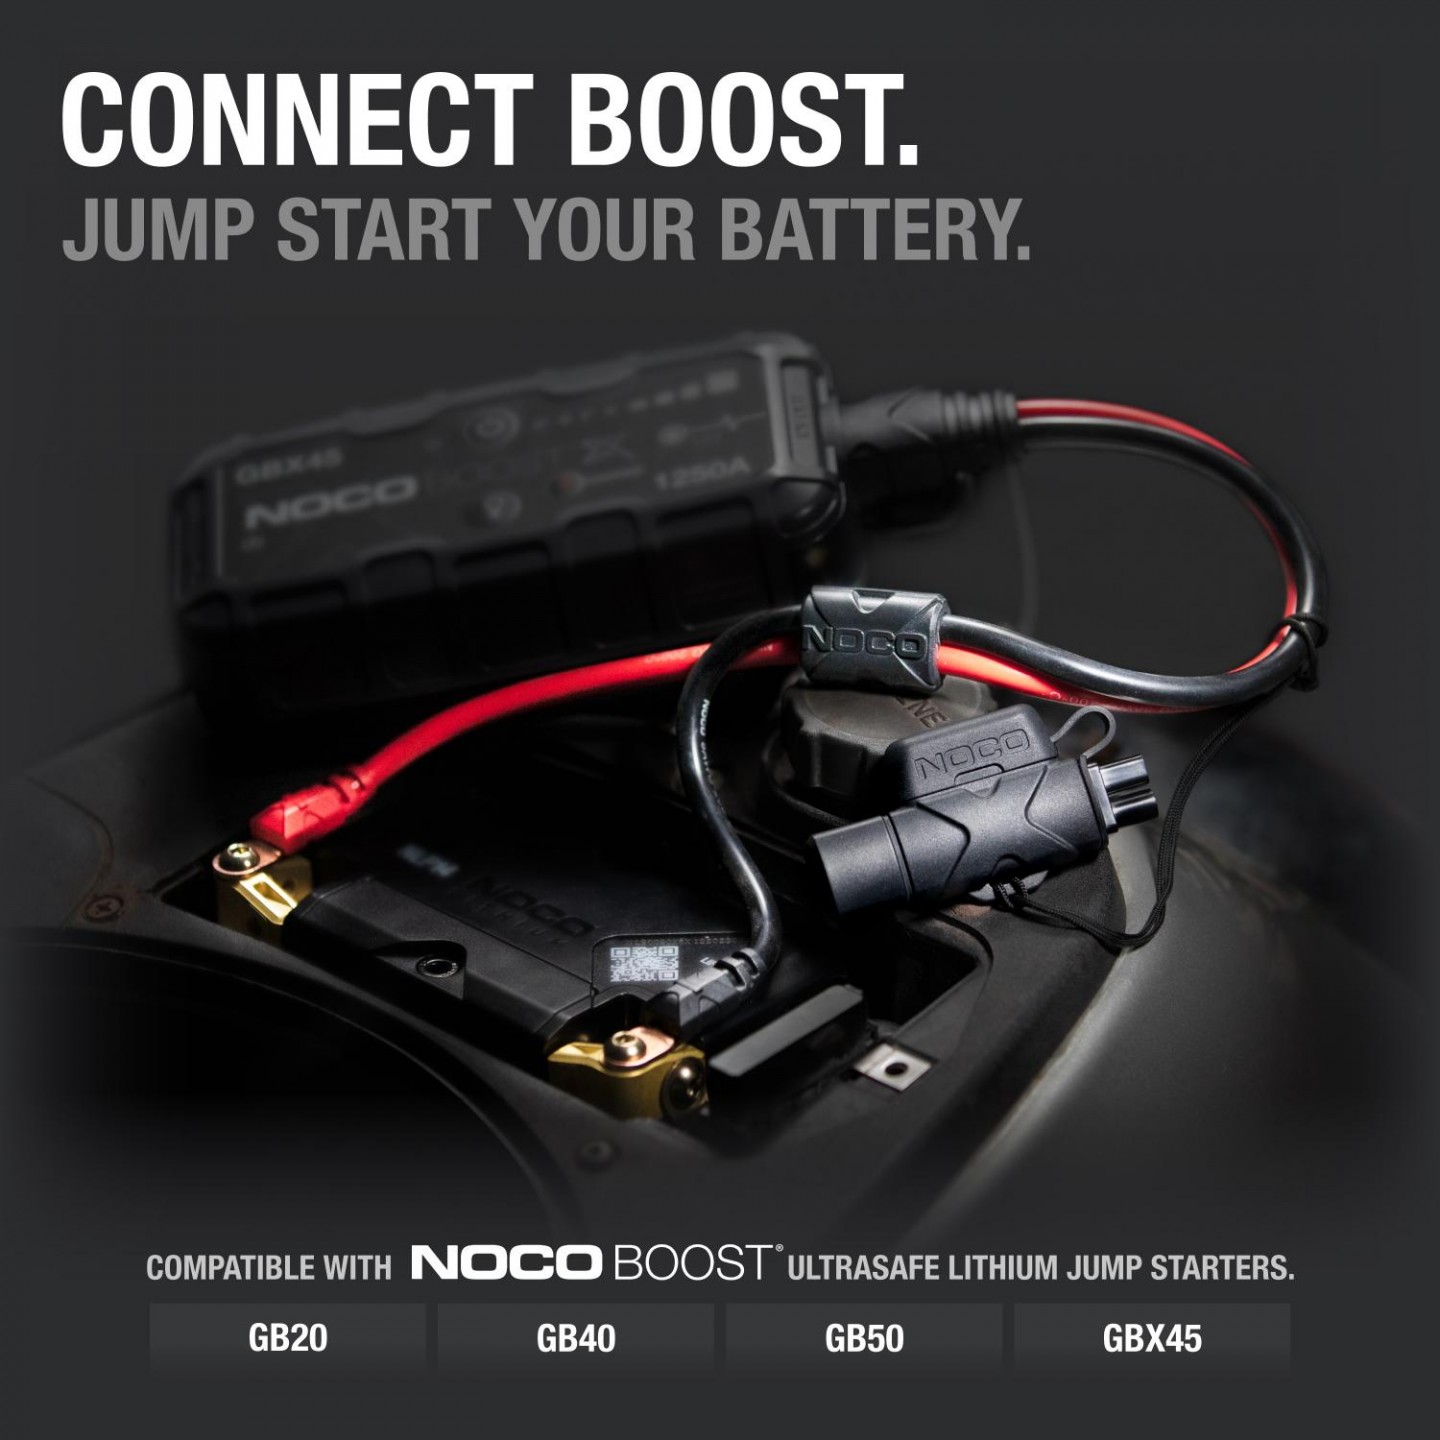 How to Recharge your NOCO GBX45 